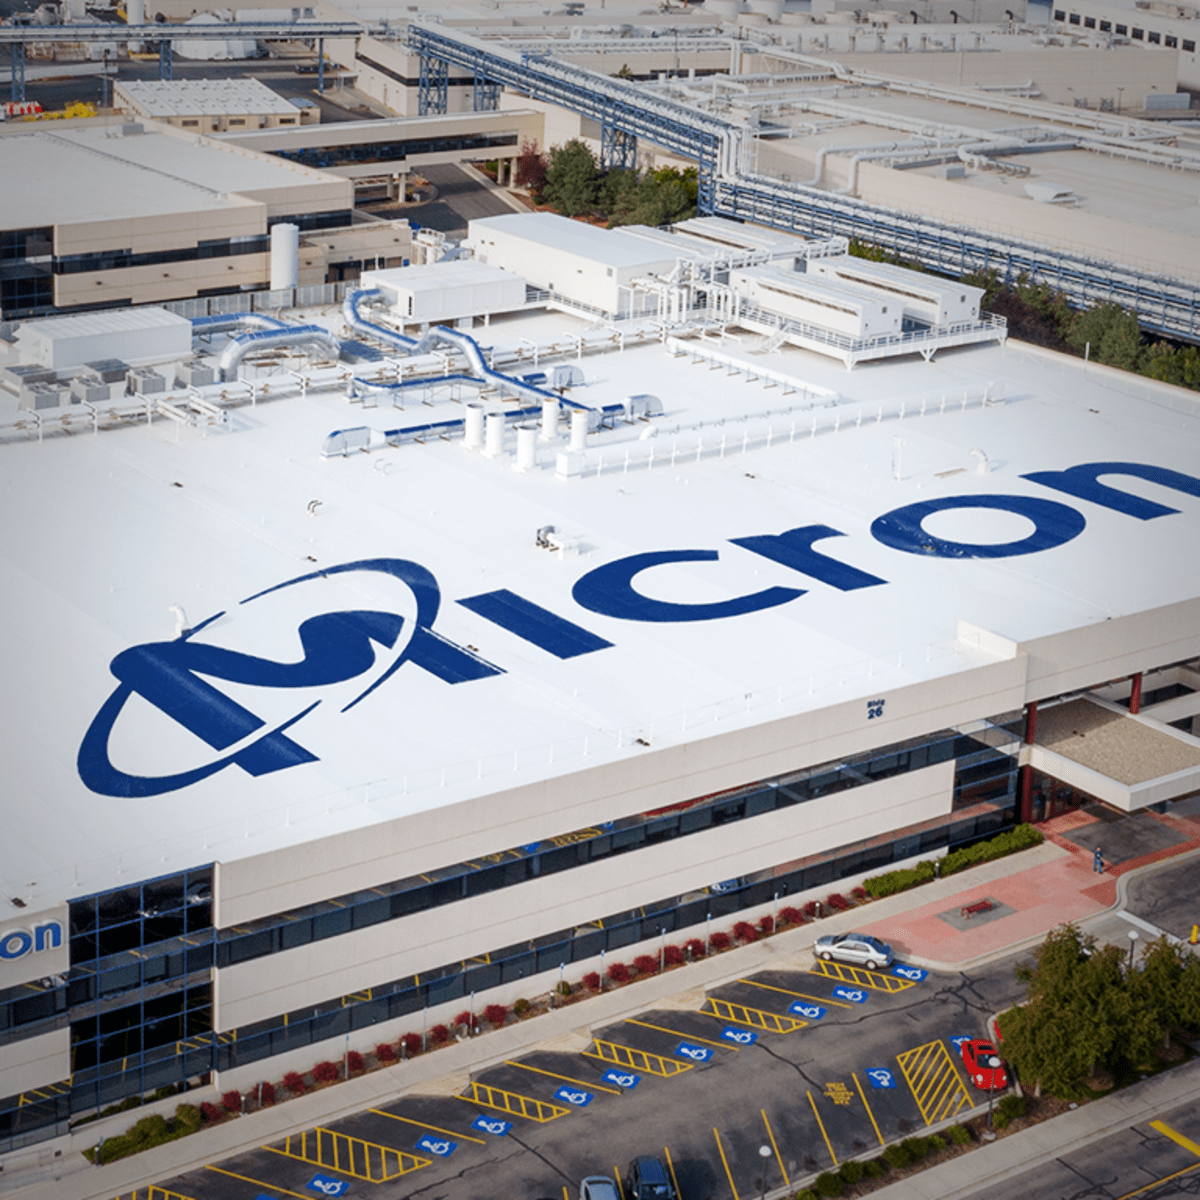 MICRON TO BUILD $15 BILLION MANUFACTURING FACILITY IN BOISE